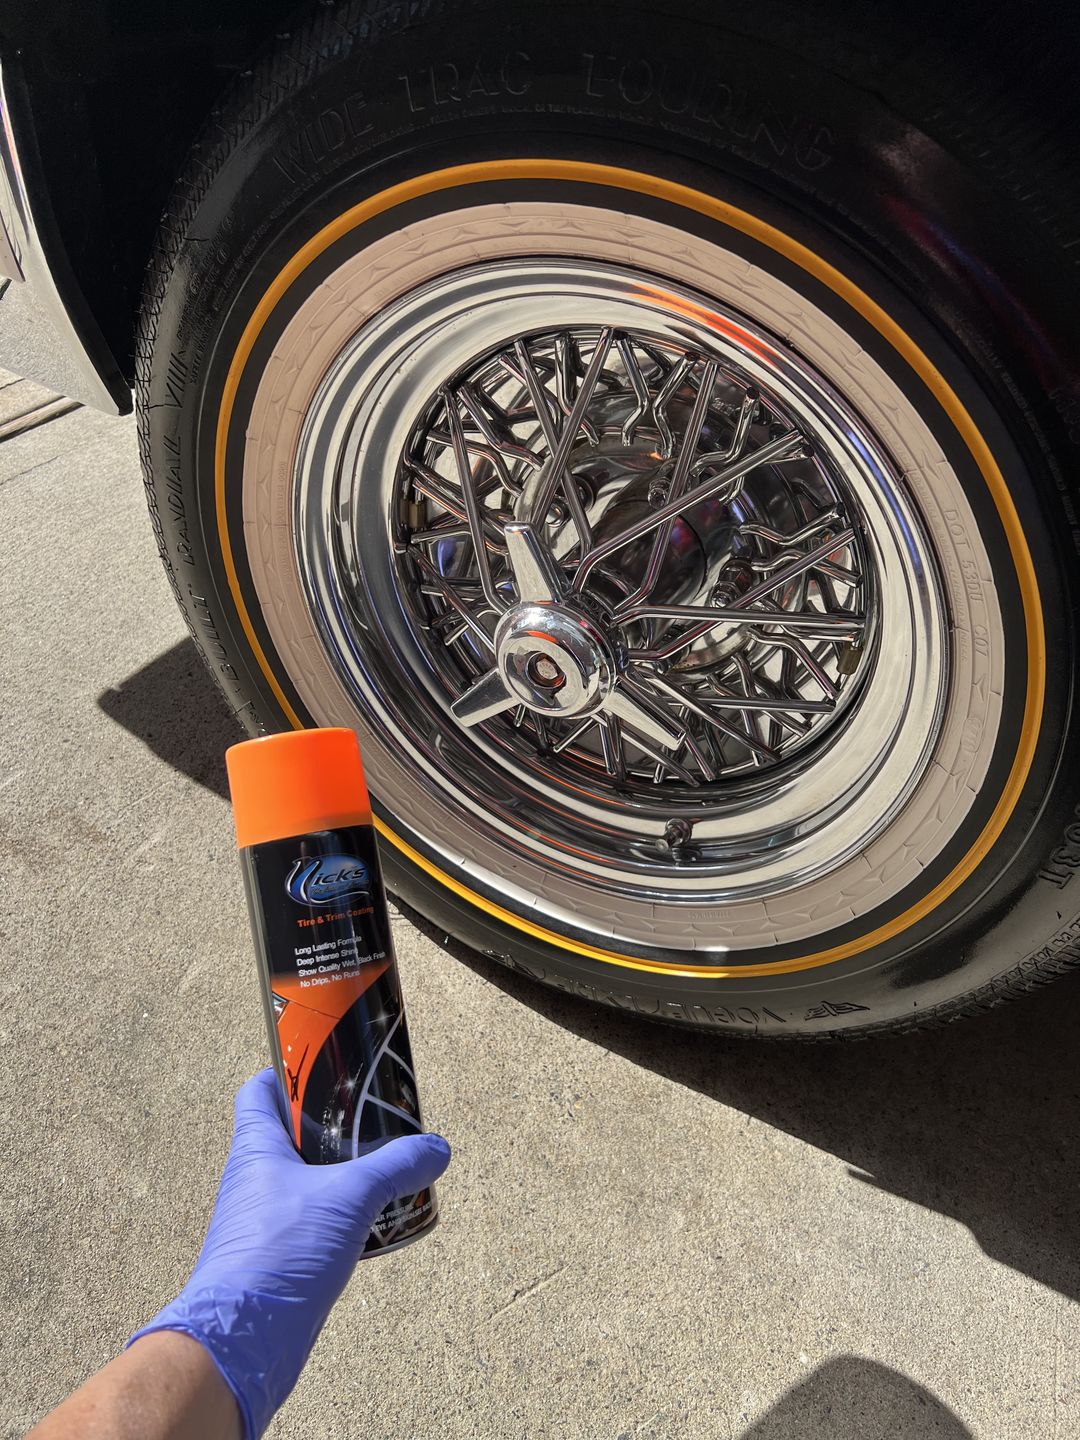 Our high-gloss tire shine will keep your car looking like new. Your tires  will be protected and shiny for weeks with our long-lasting and…